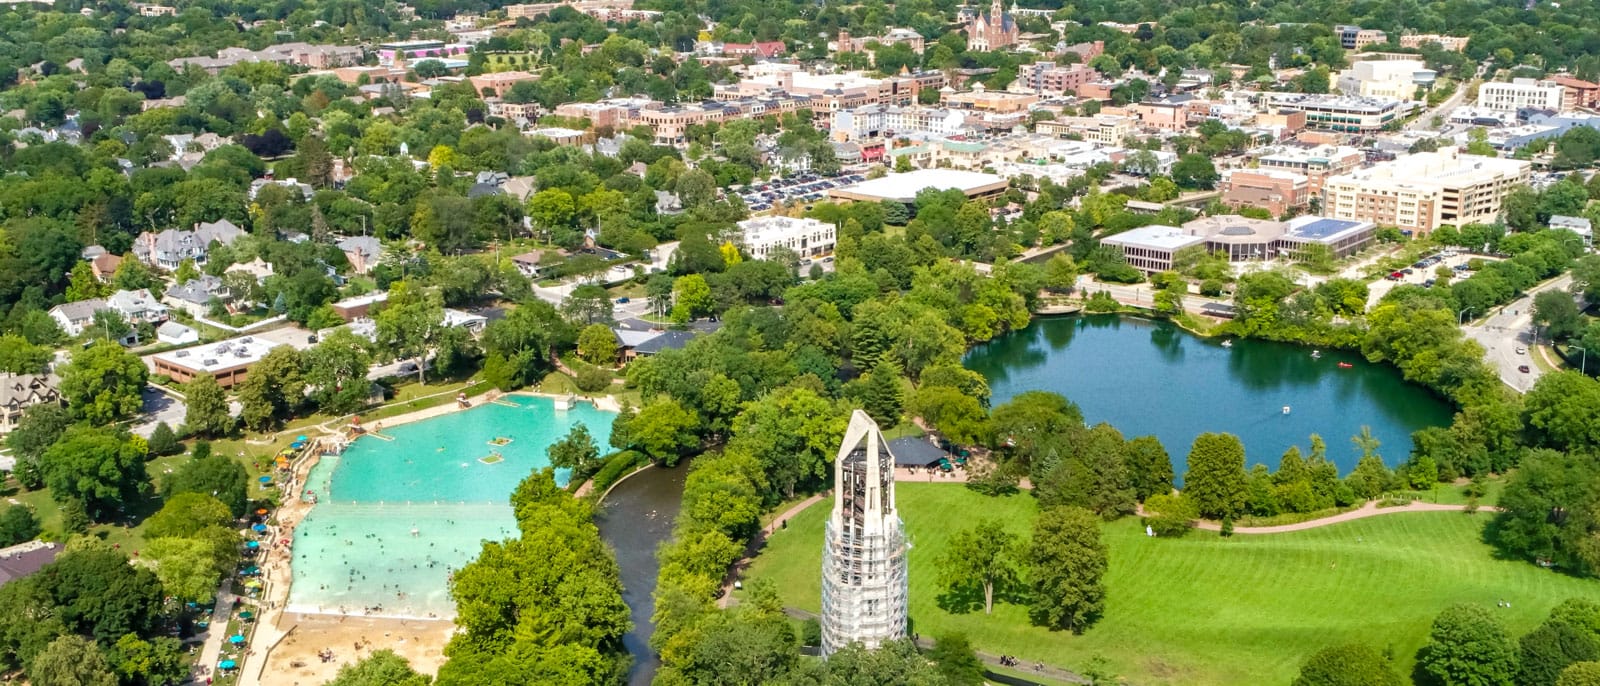 Centennial Beach in Naperville, Illinois from the air